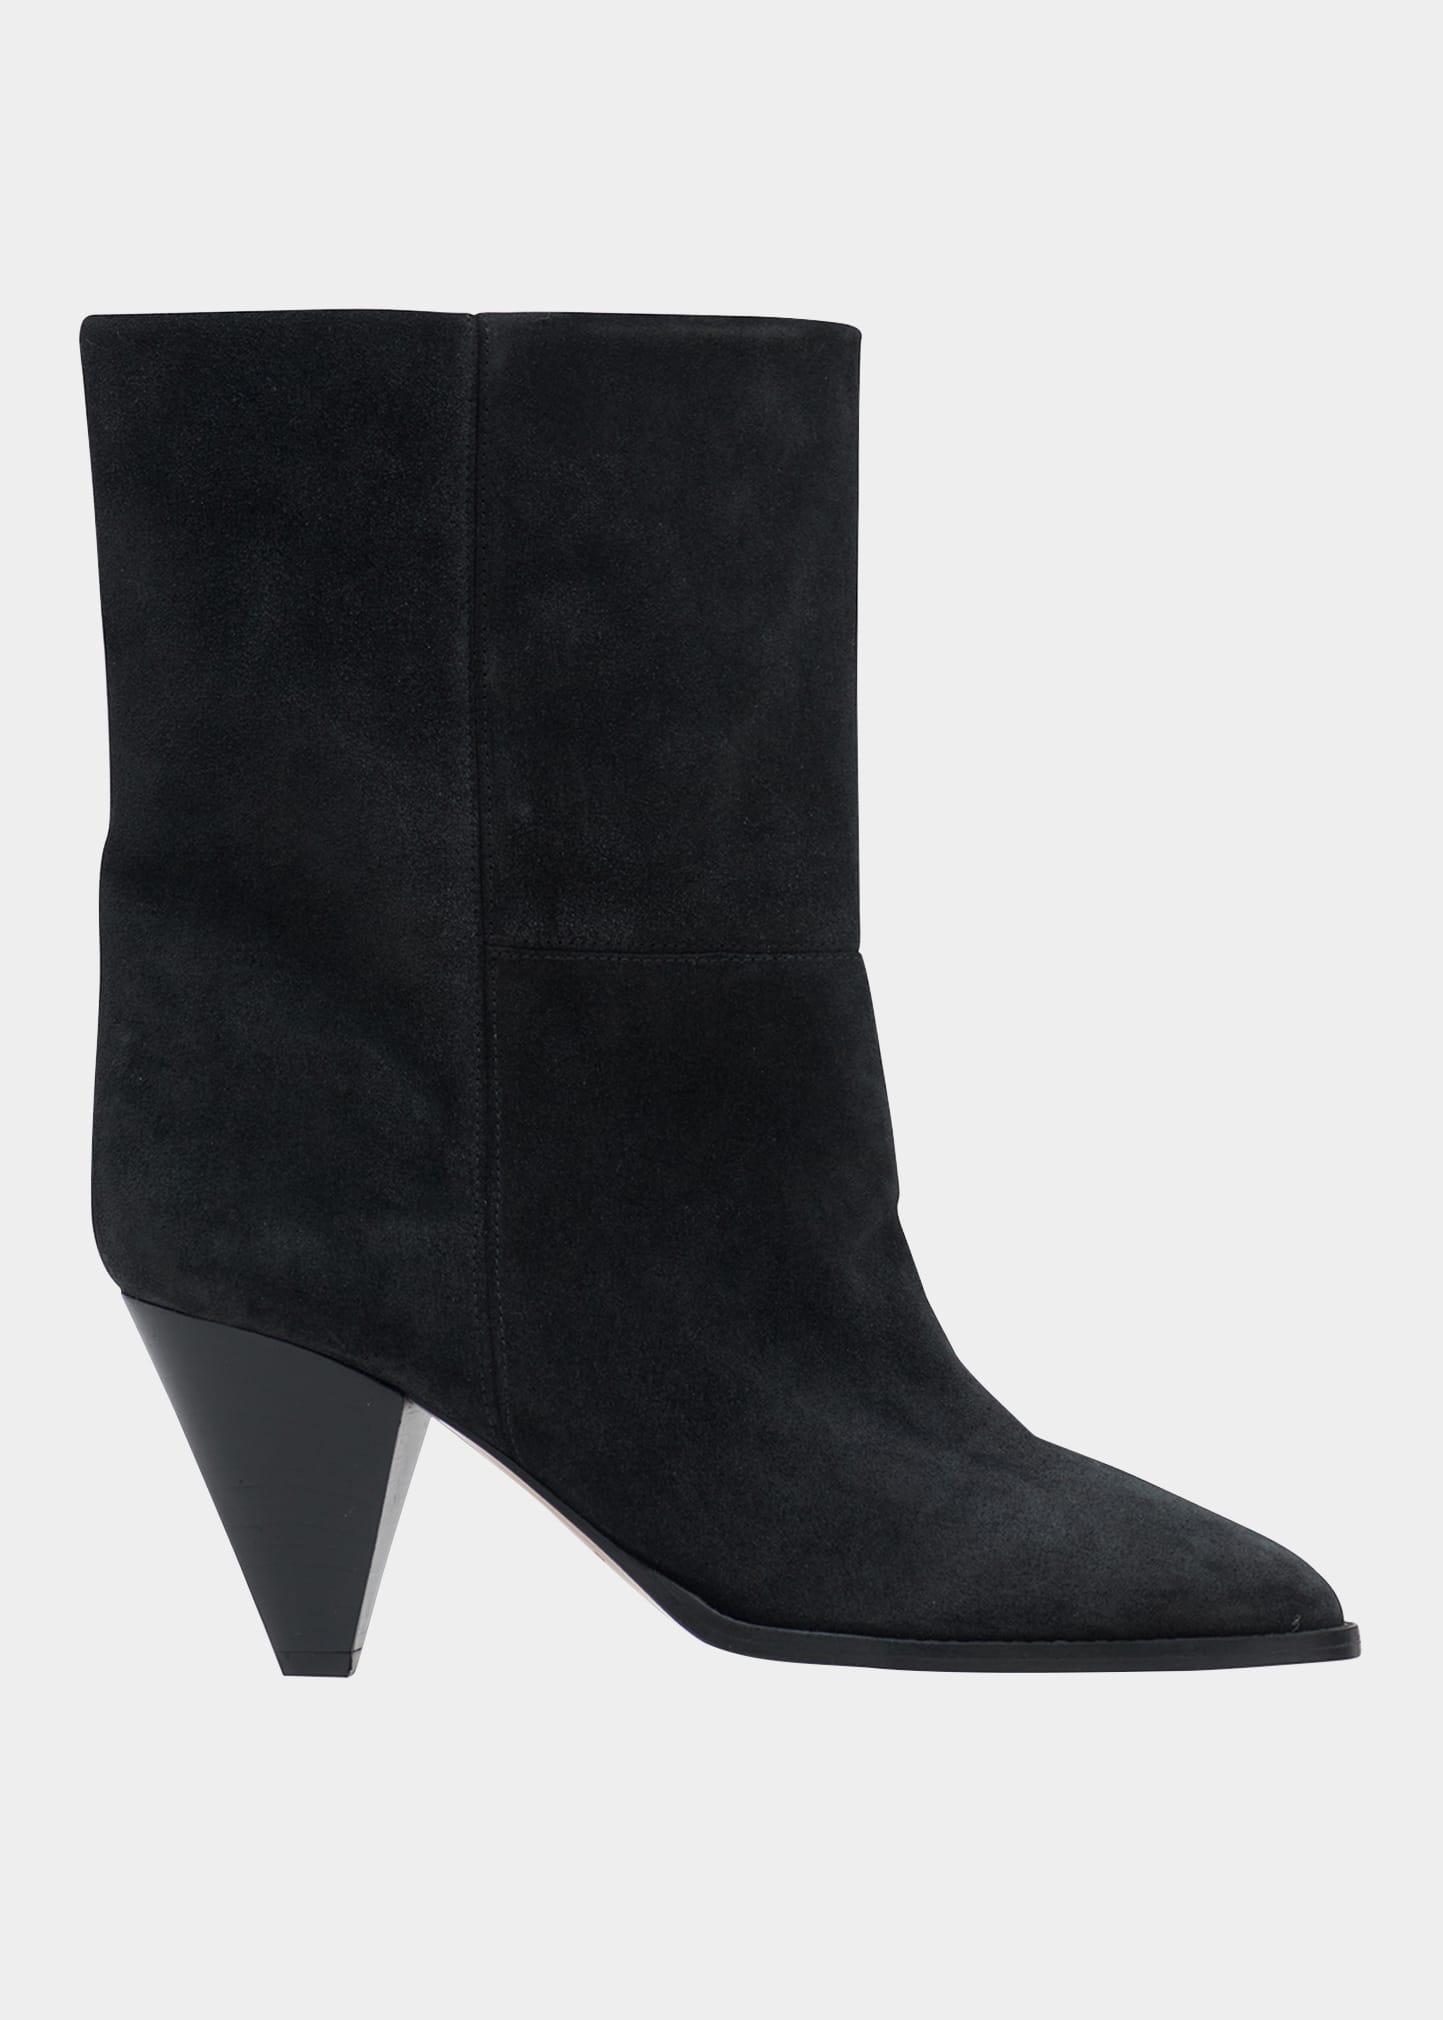 Isabel Marant Rouxa Suede Ankle Booties in Blue | Lyst